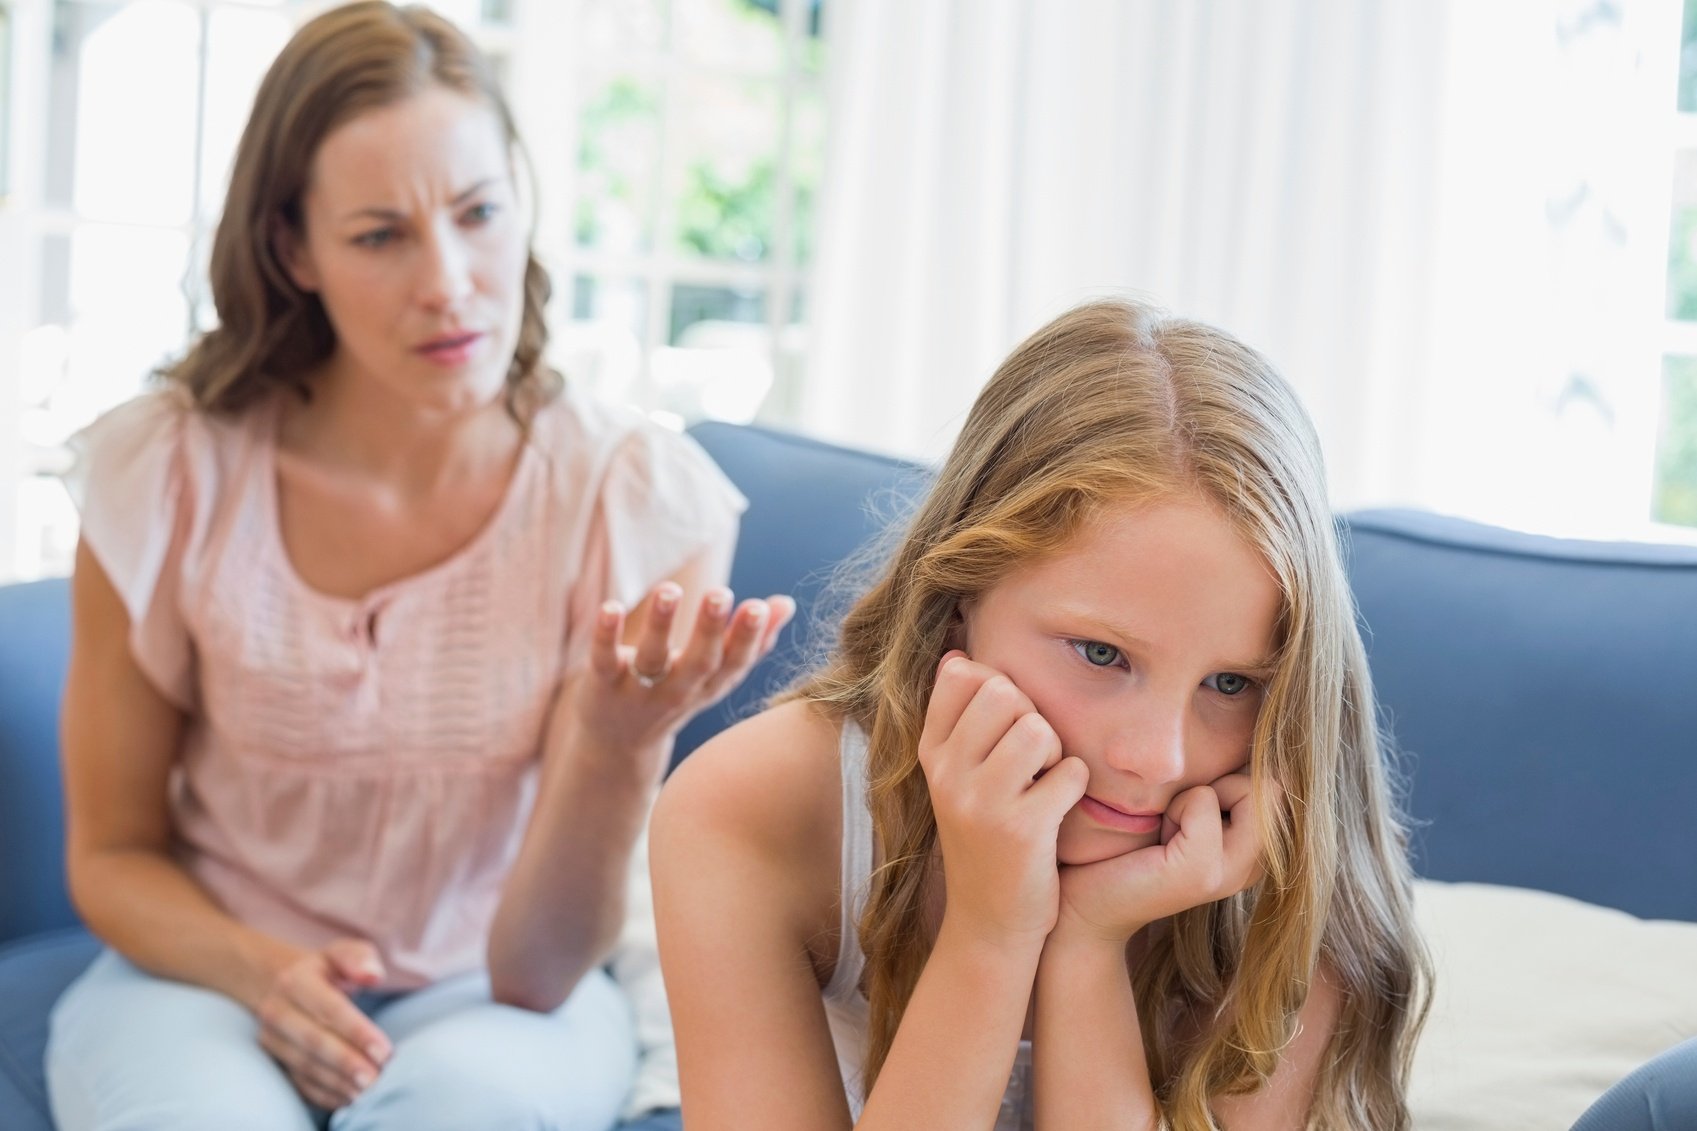 Can I Press Charges for Parental Alienation?